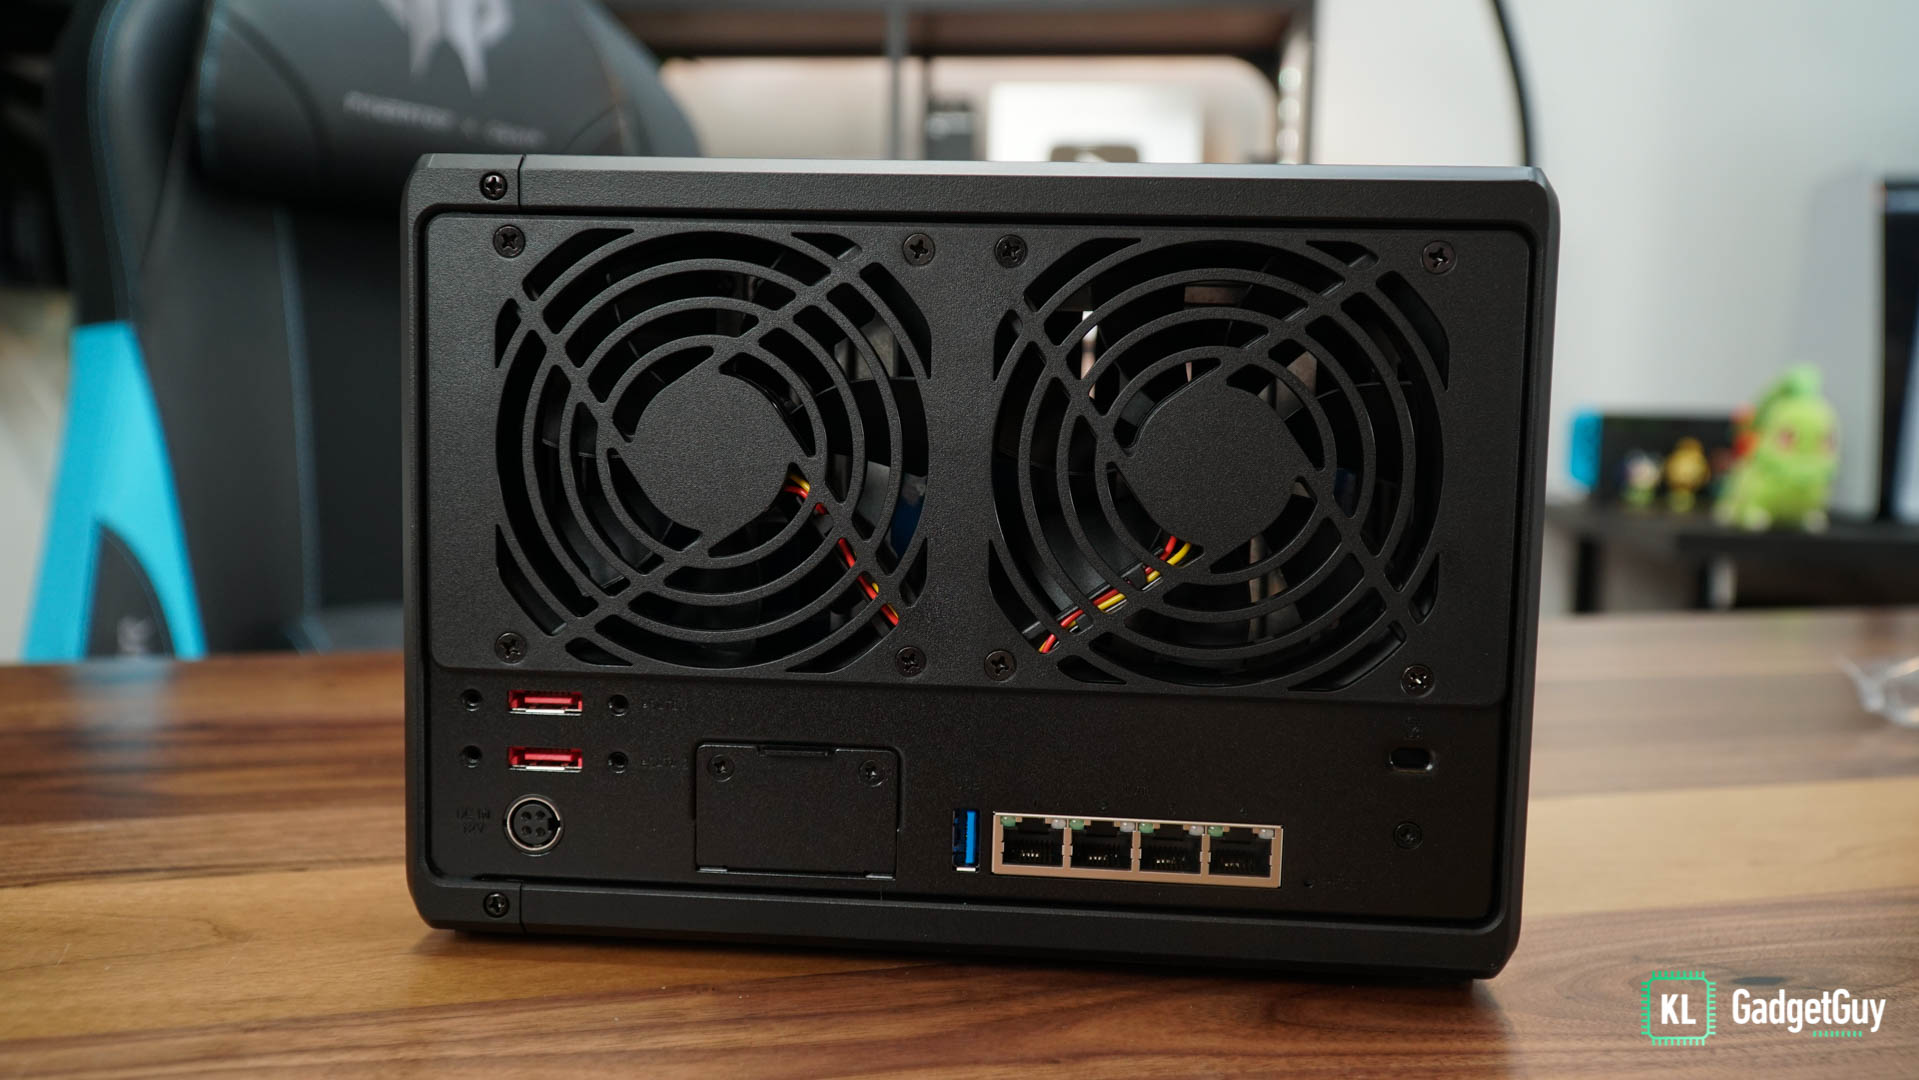 Synology DS1522+ NAS Review » YugaTech